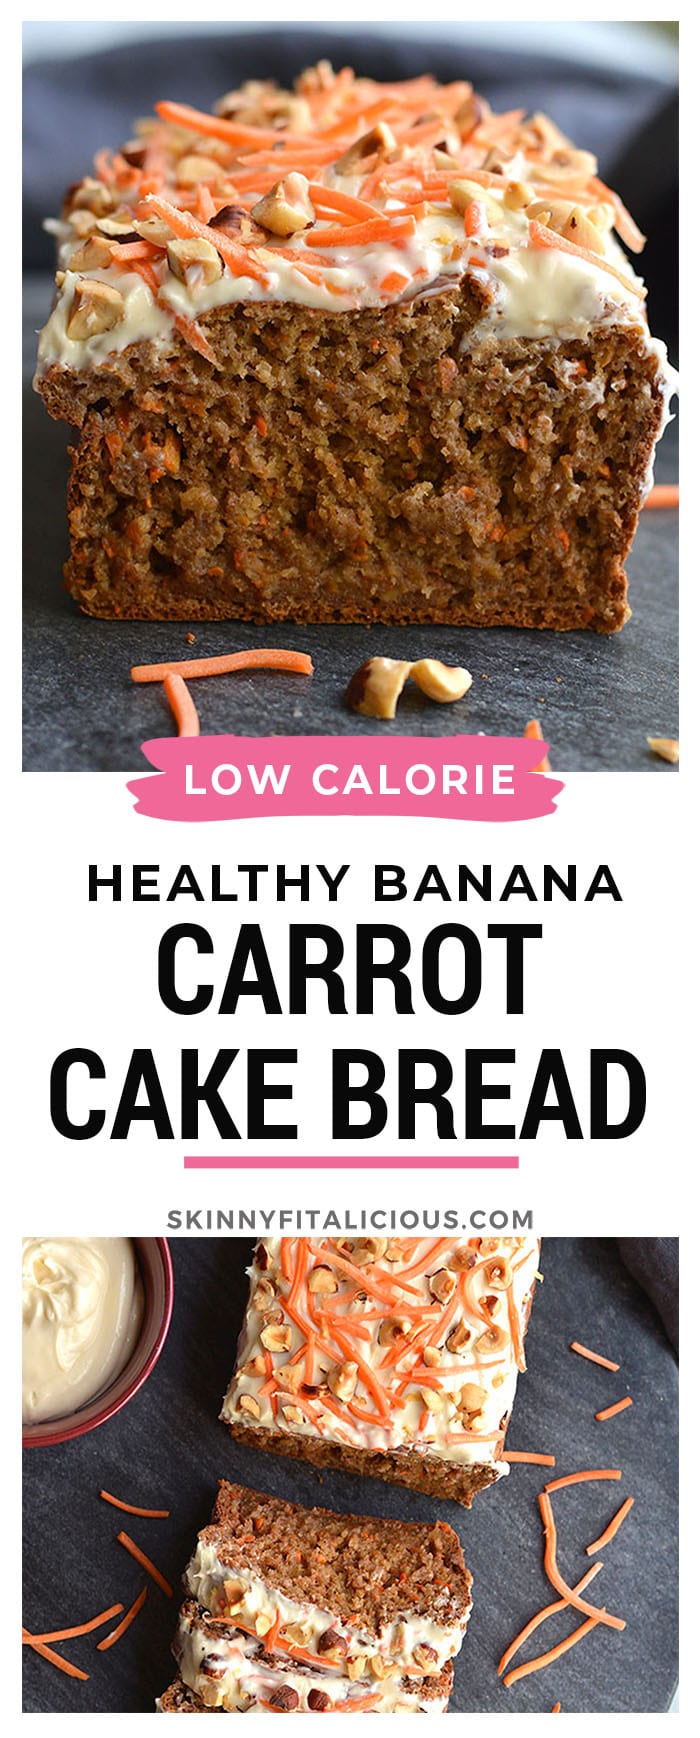 Banana Carrot Cake Bread is a healthier, refined sugar free bread the whole family will love! A one bowl recipe with a few simple ingredients. A wholesome bread for snacking that doubles as a healthier dessert.